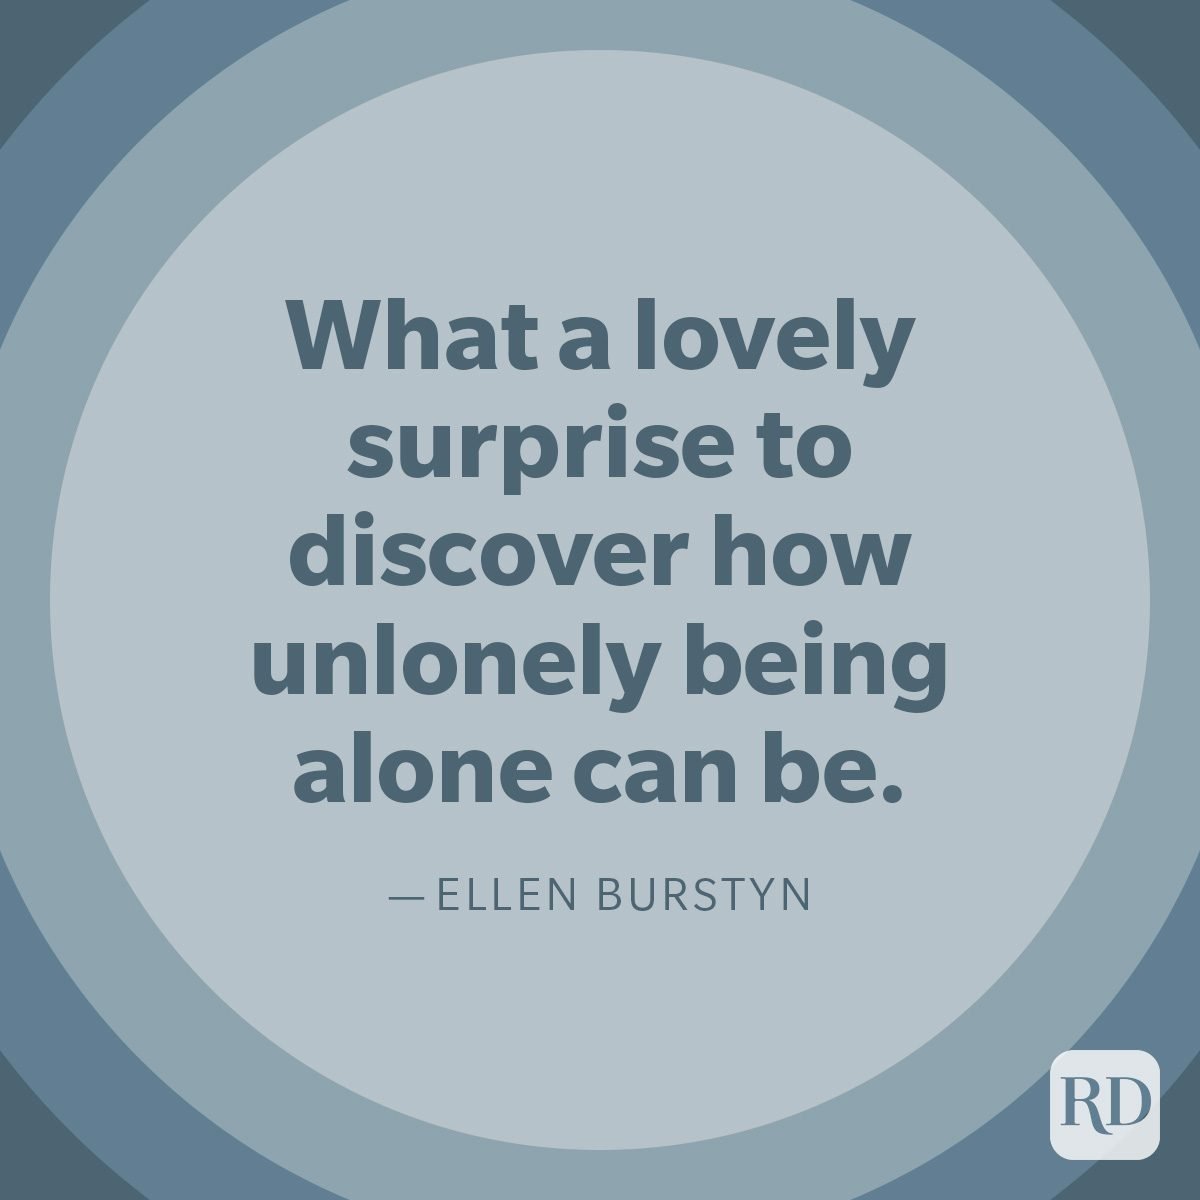 51 Loneliness Quotes: Reflective, Inspiring Sayings | Reader's Digest